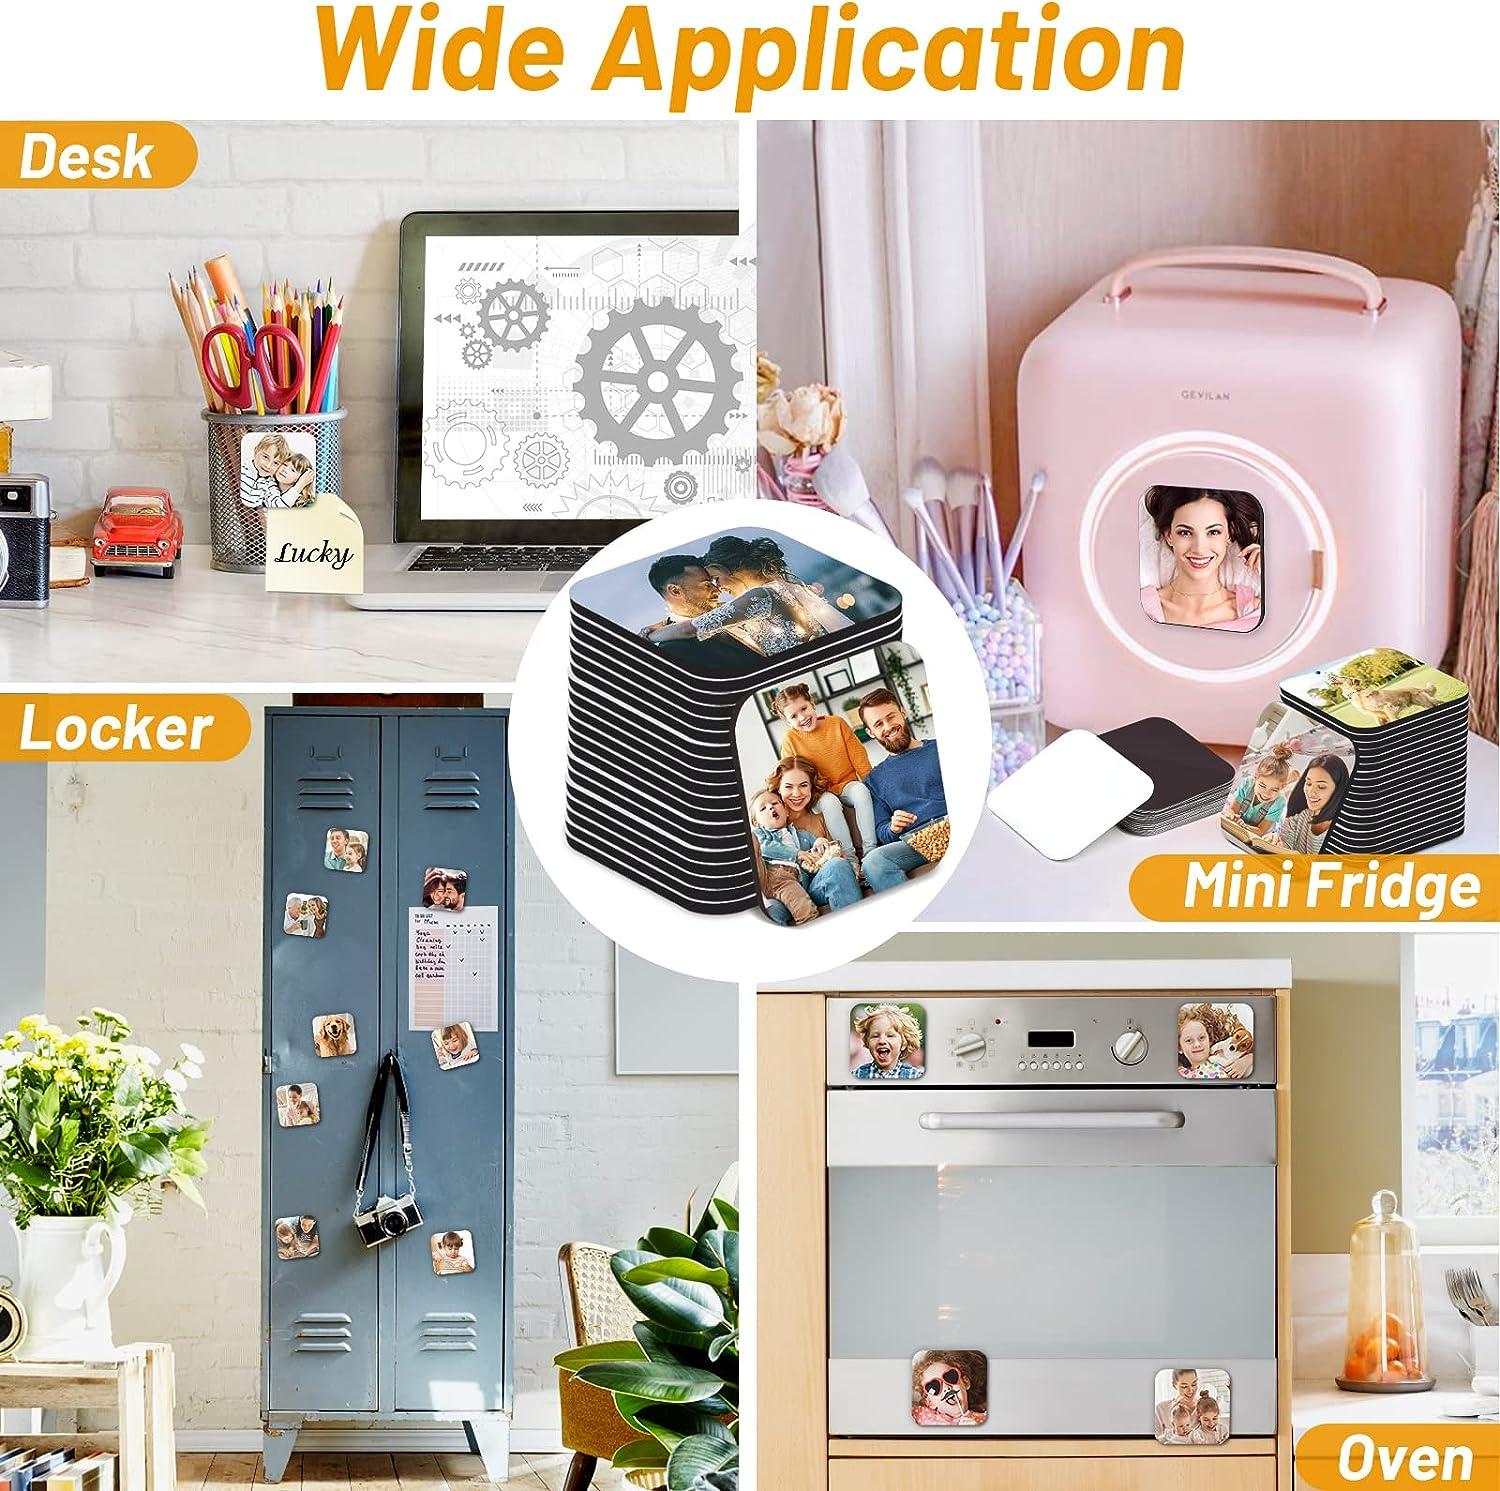 Wholesale fridge magnet maker machine for Decoration, and Many More 